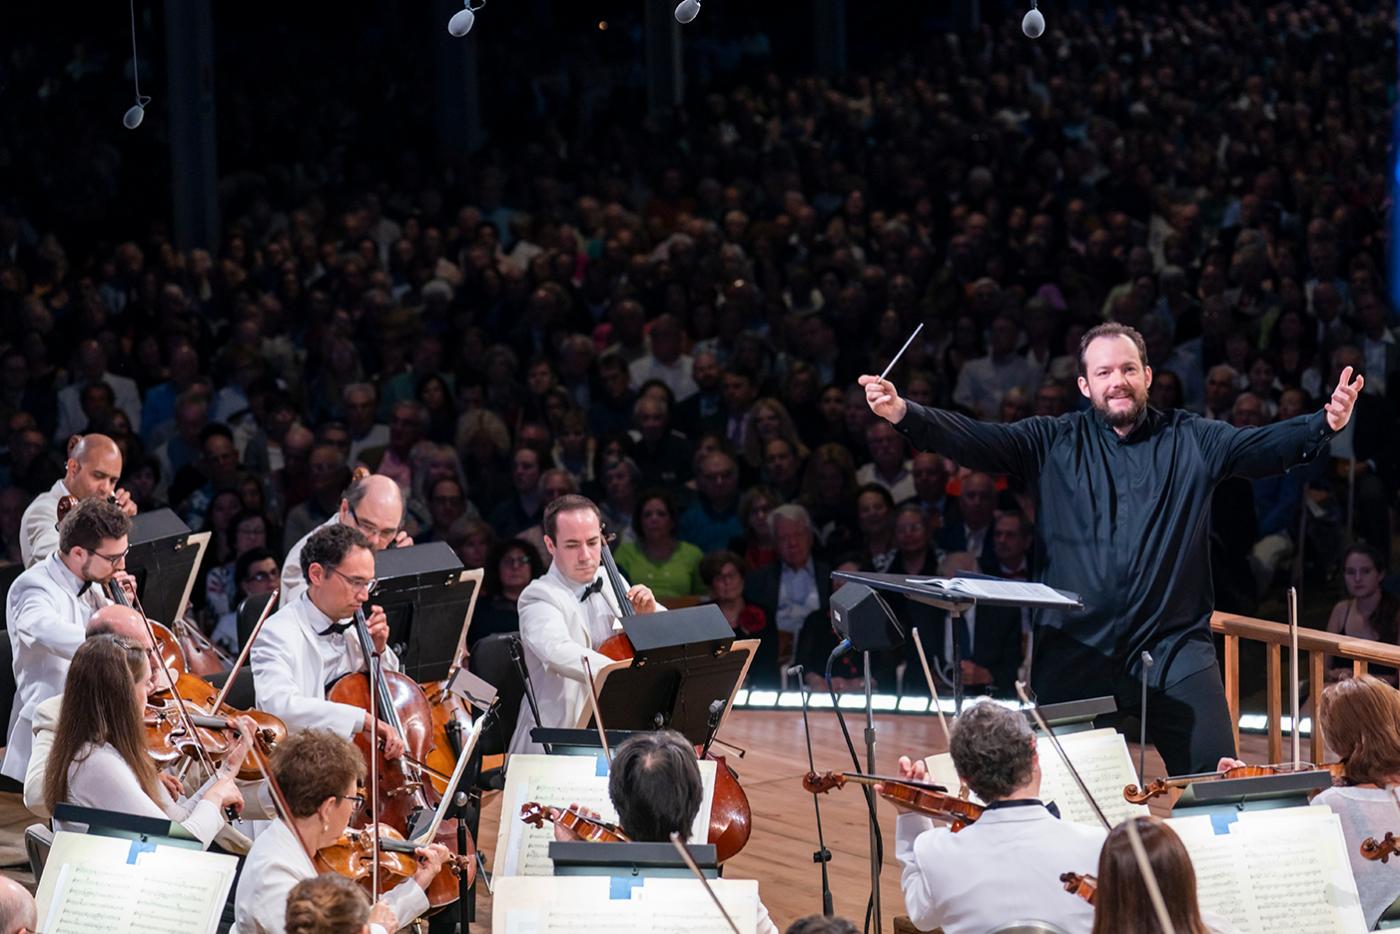 Andris Nelsons leads the Boston Symphony Orchestra at Tanglewood in a celebration of Leonard Bernstein's Centennial. Photo: Chris Lee